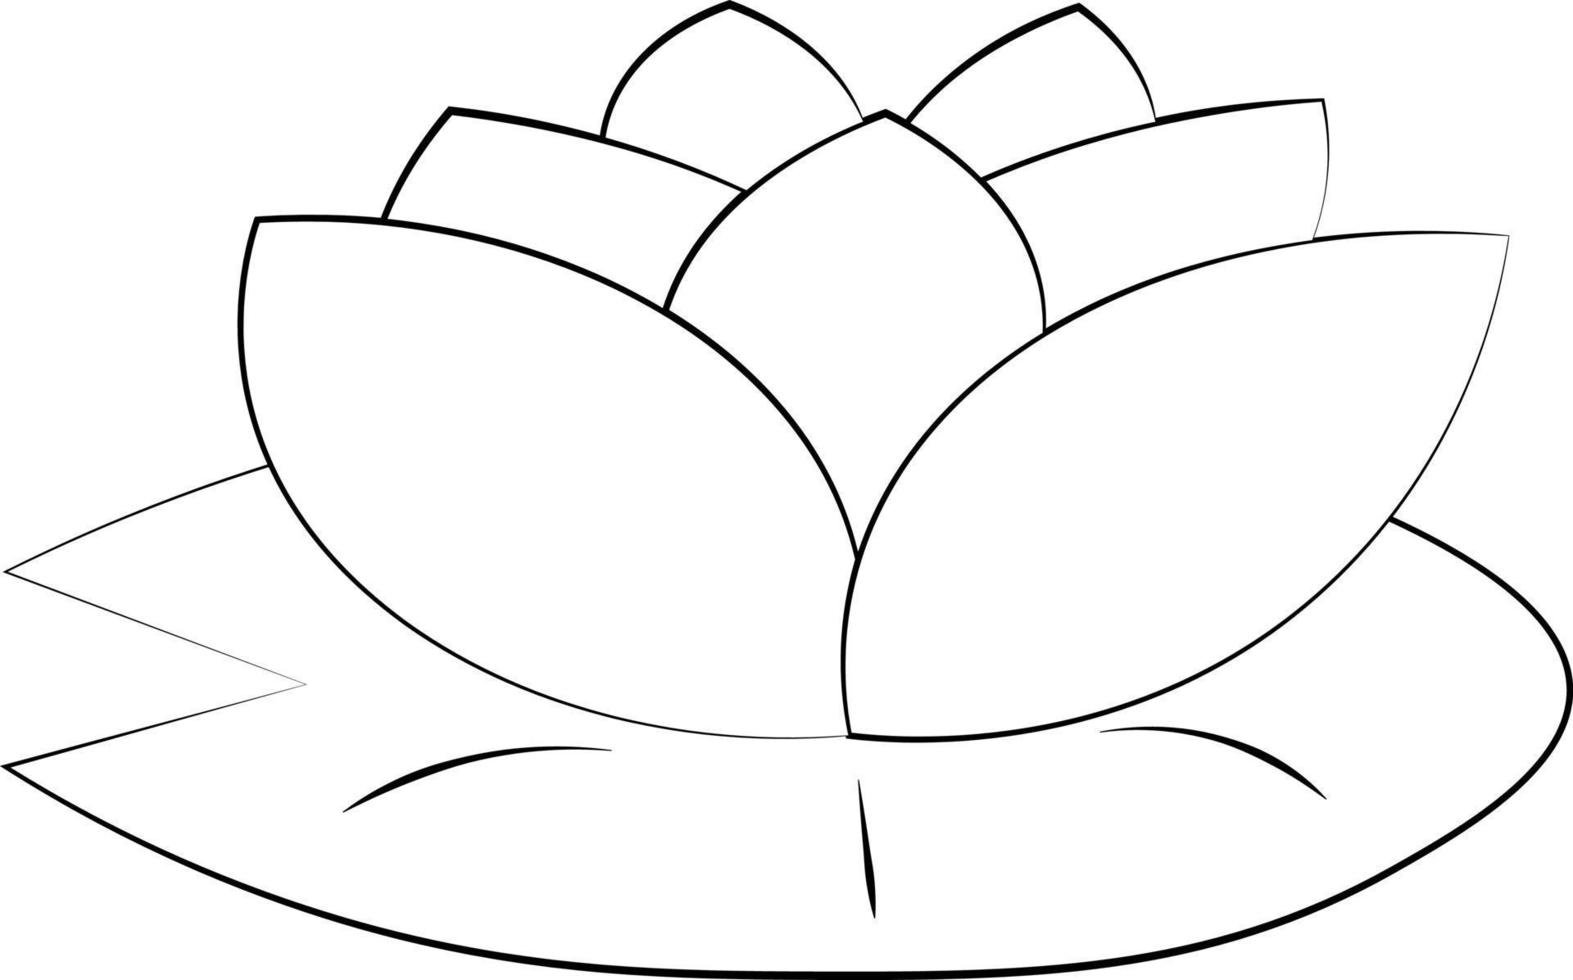 Single element Waterlily. Draw illustration in black and white vector